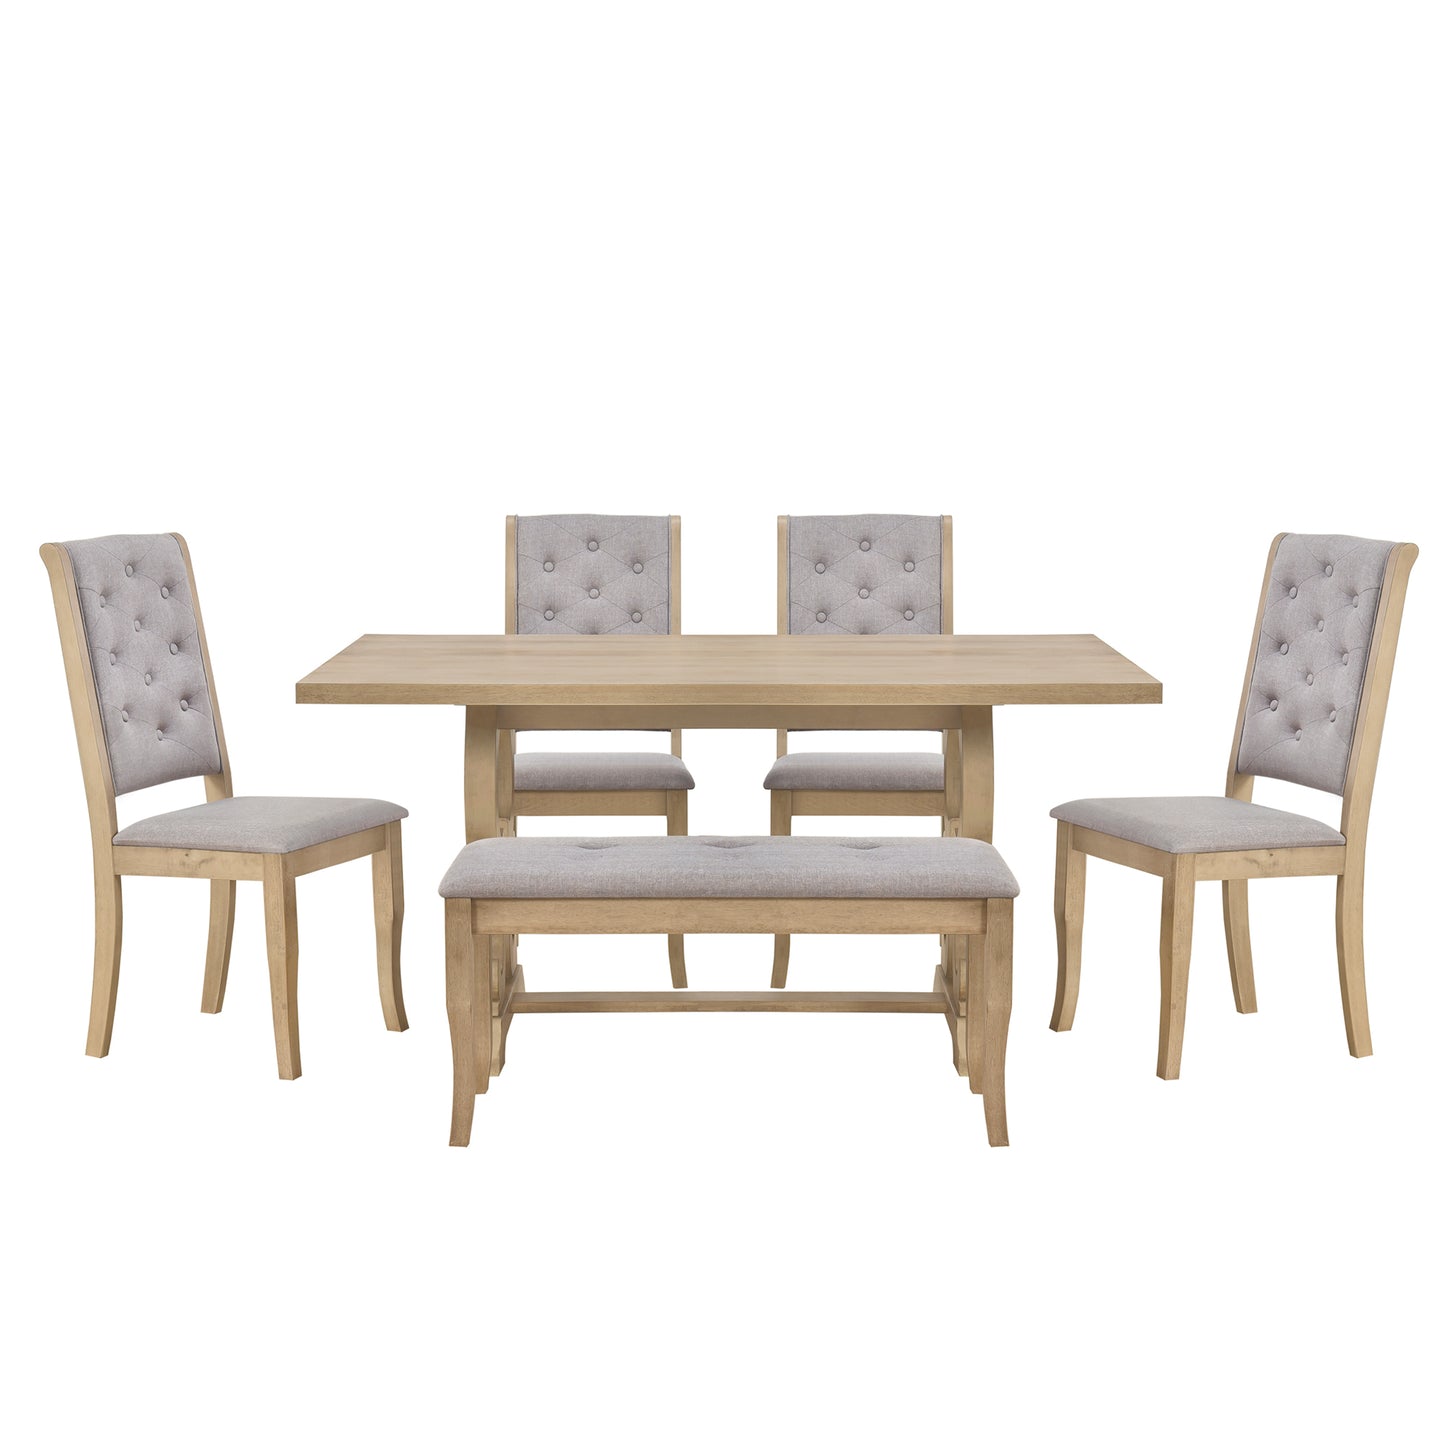 6-Piece Retro Dining Set with Unique Scroll Table Legs and Upholstered Seats  (Grey Wash)